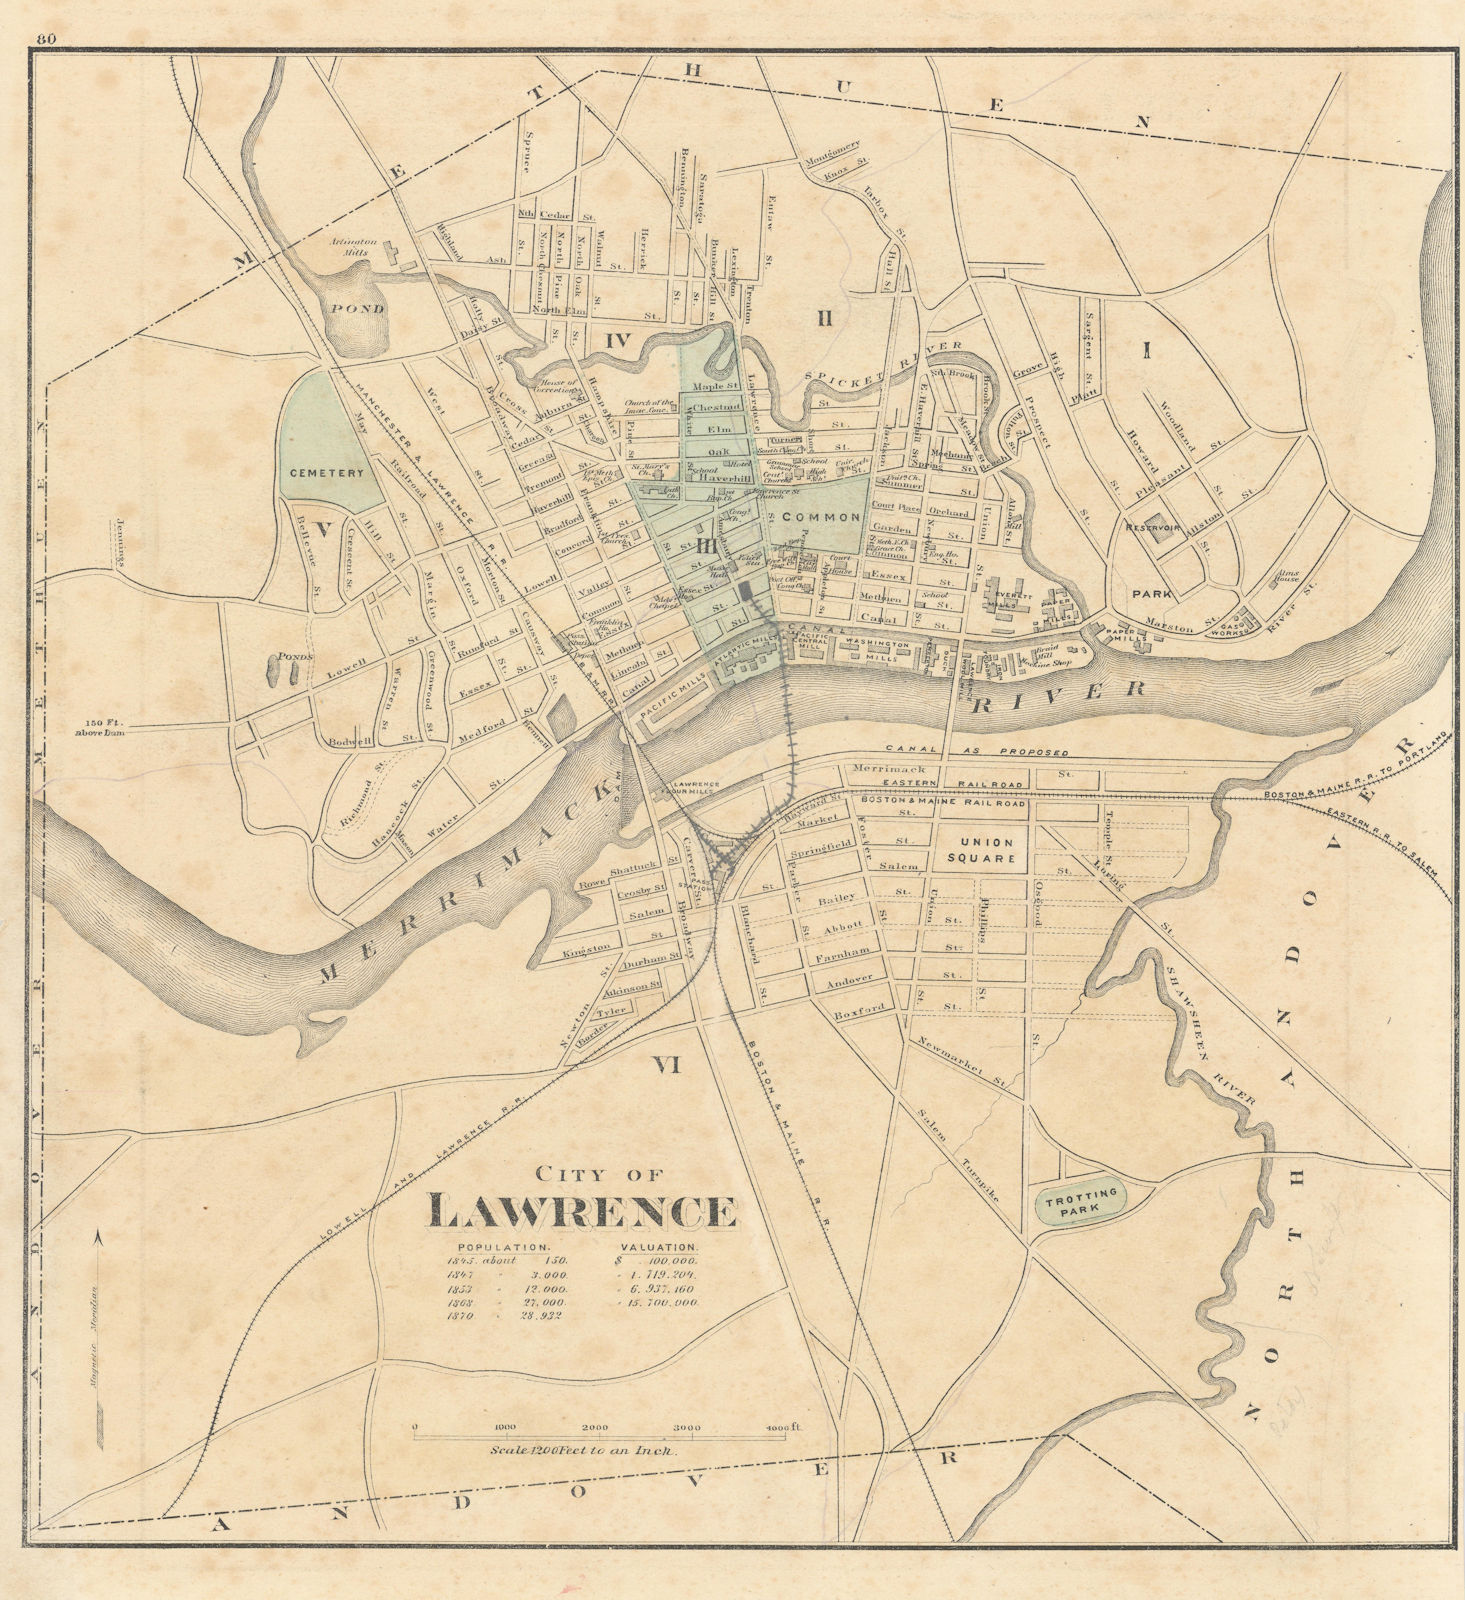 Associate Product City of Lawrence, Massachusetts. Town plan. WALLING & GRAY 1871 old map